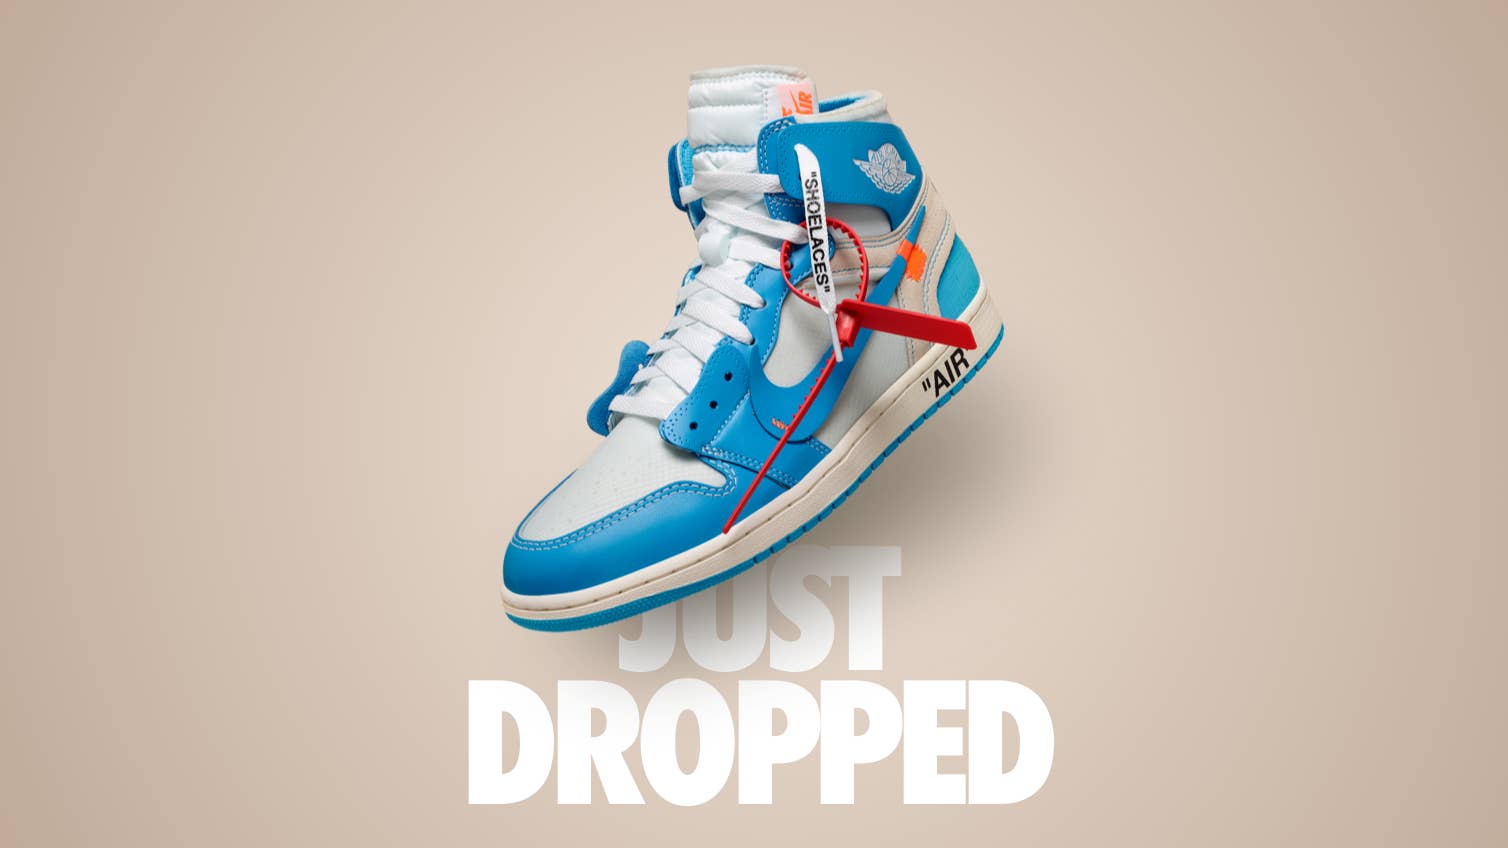 Nike Just Released the 'UNC' Off-White x Air Jordan | Complex